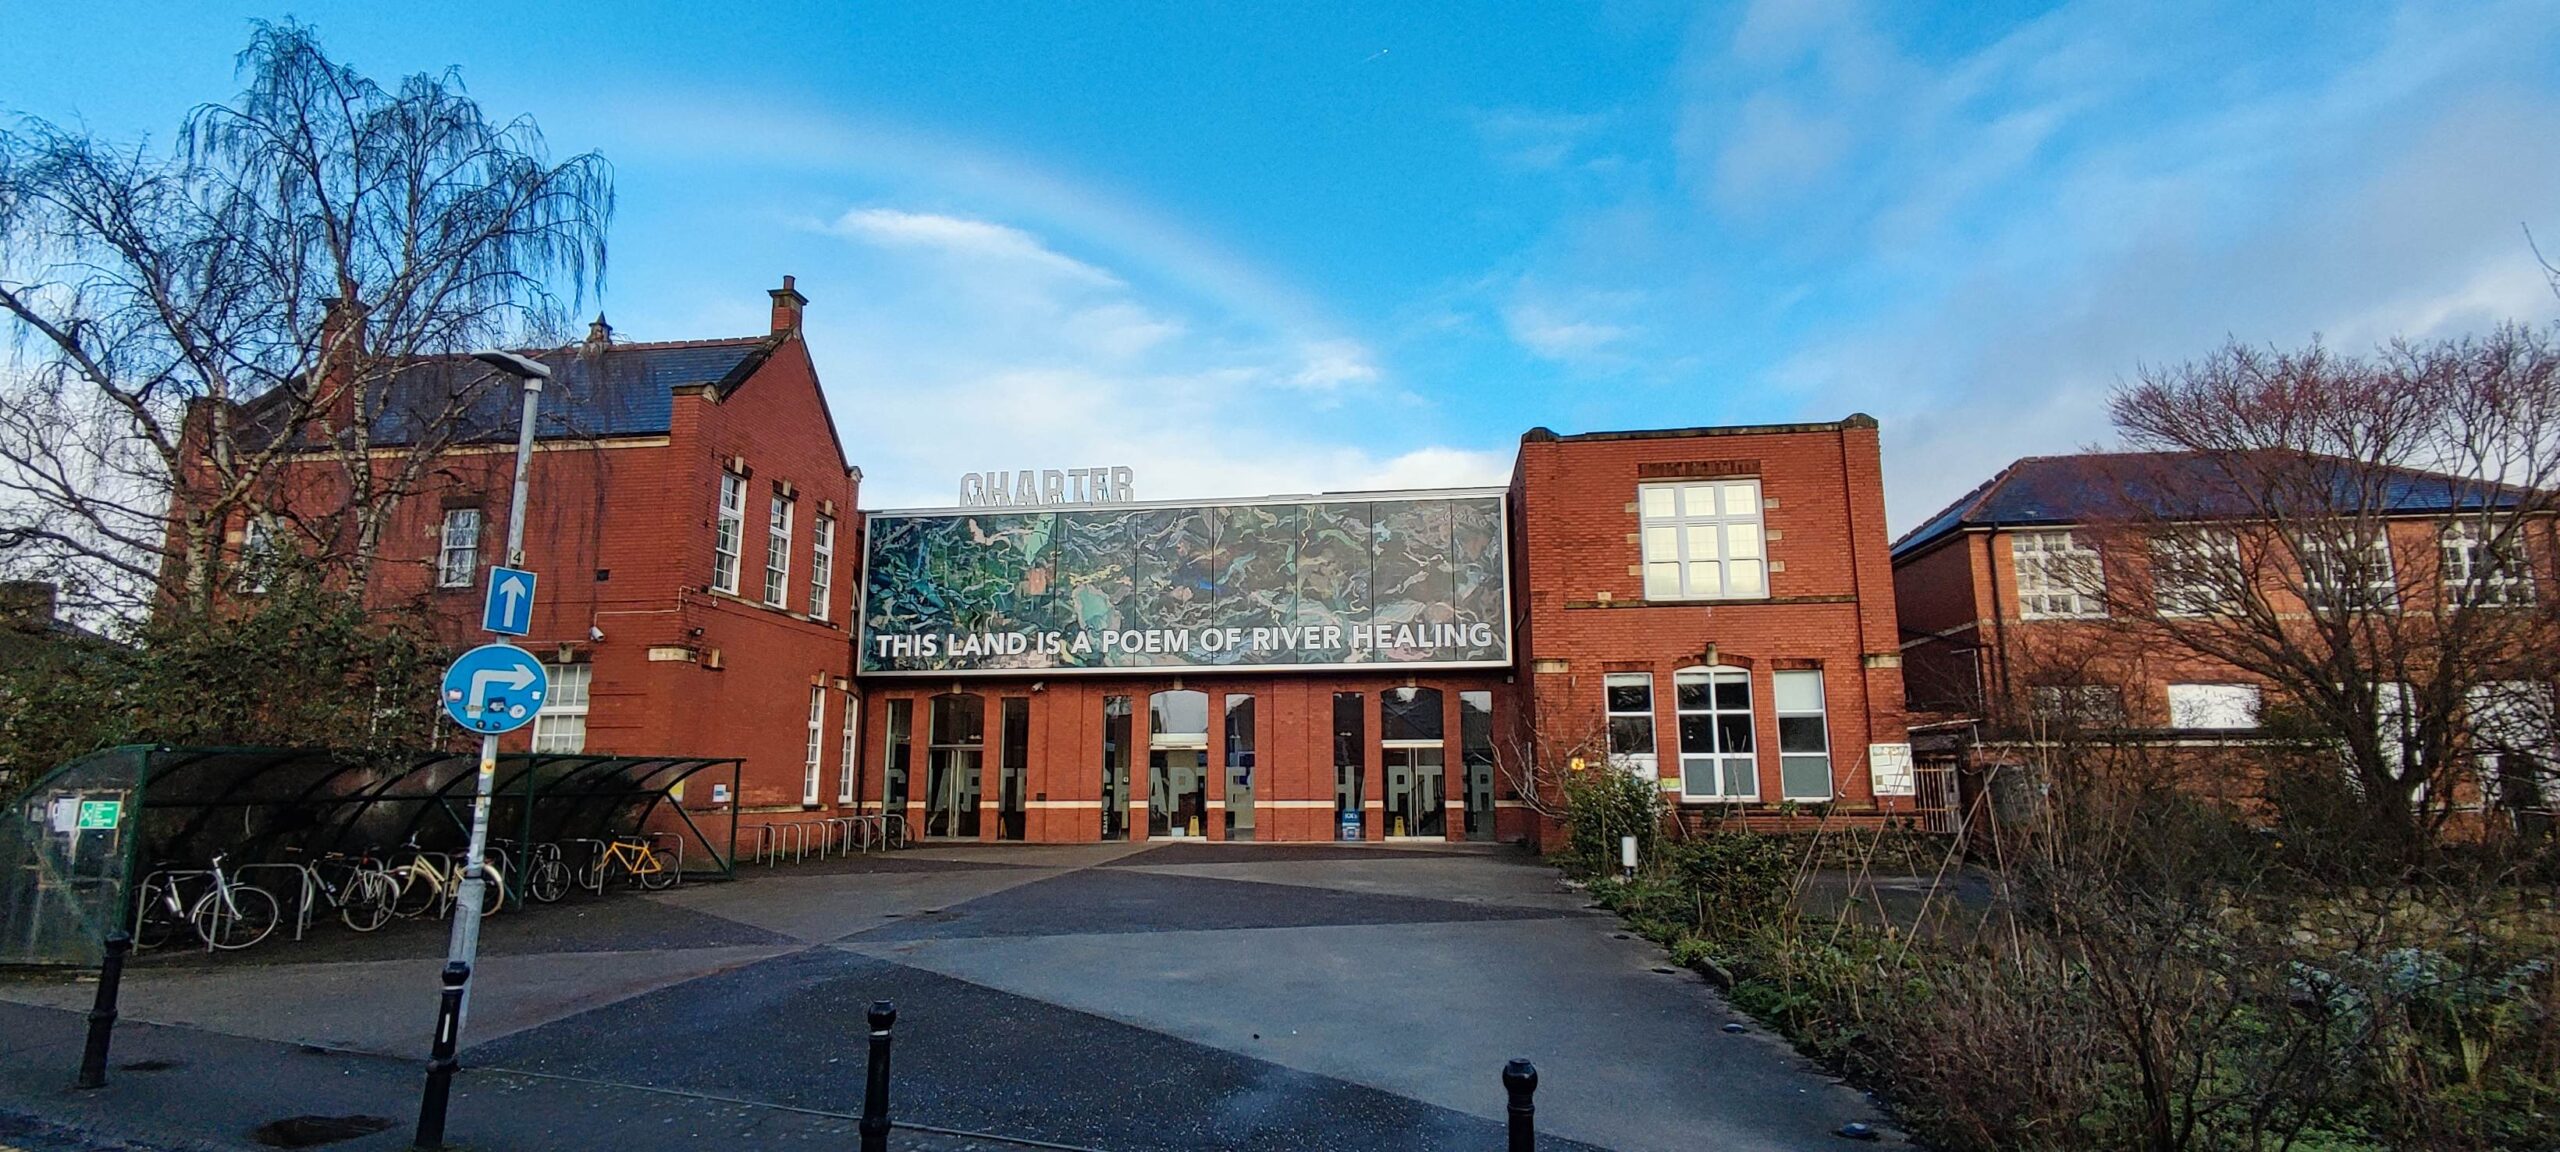 Photo of Chapter Arts Centre Cardiff